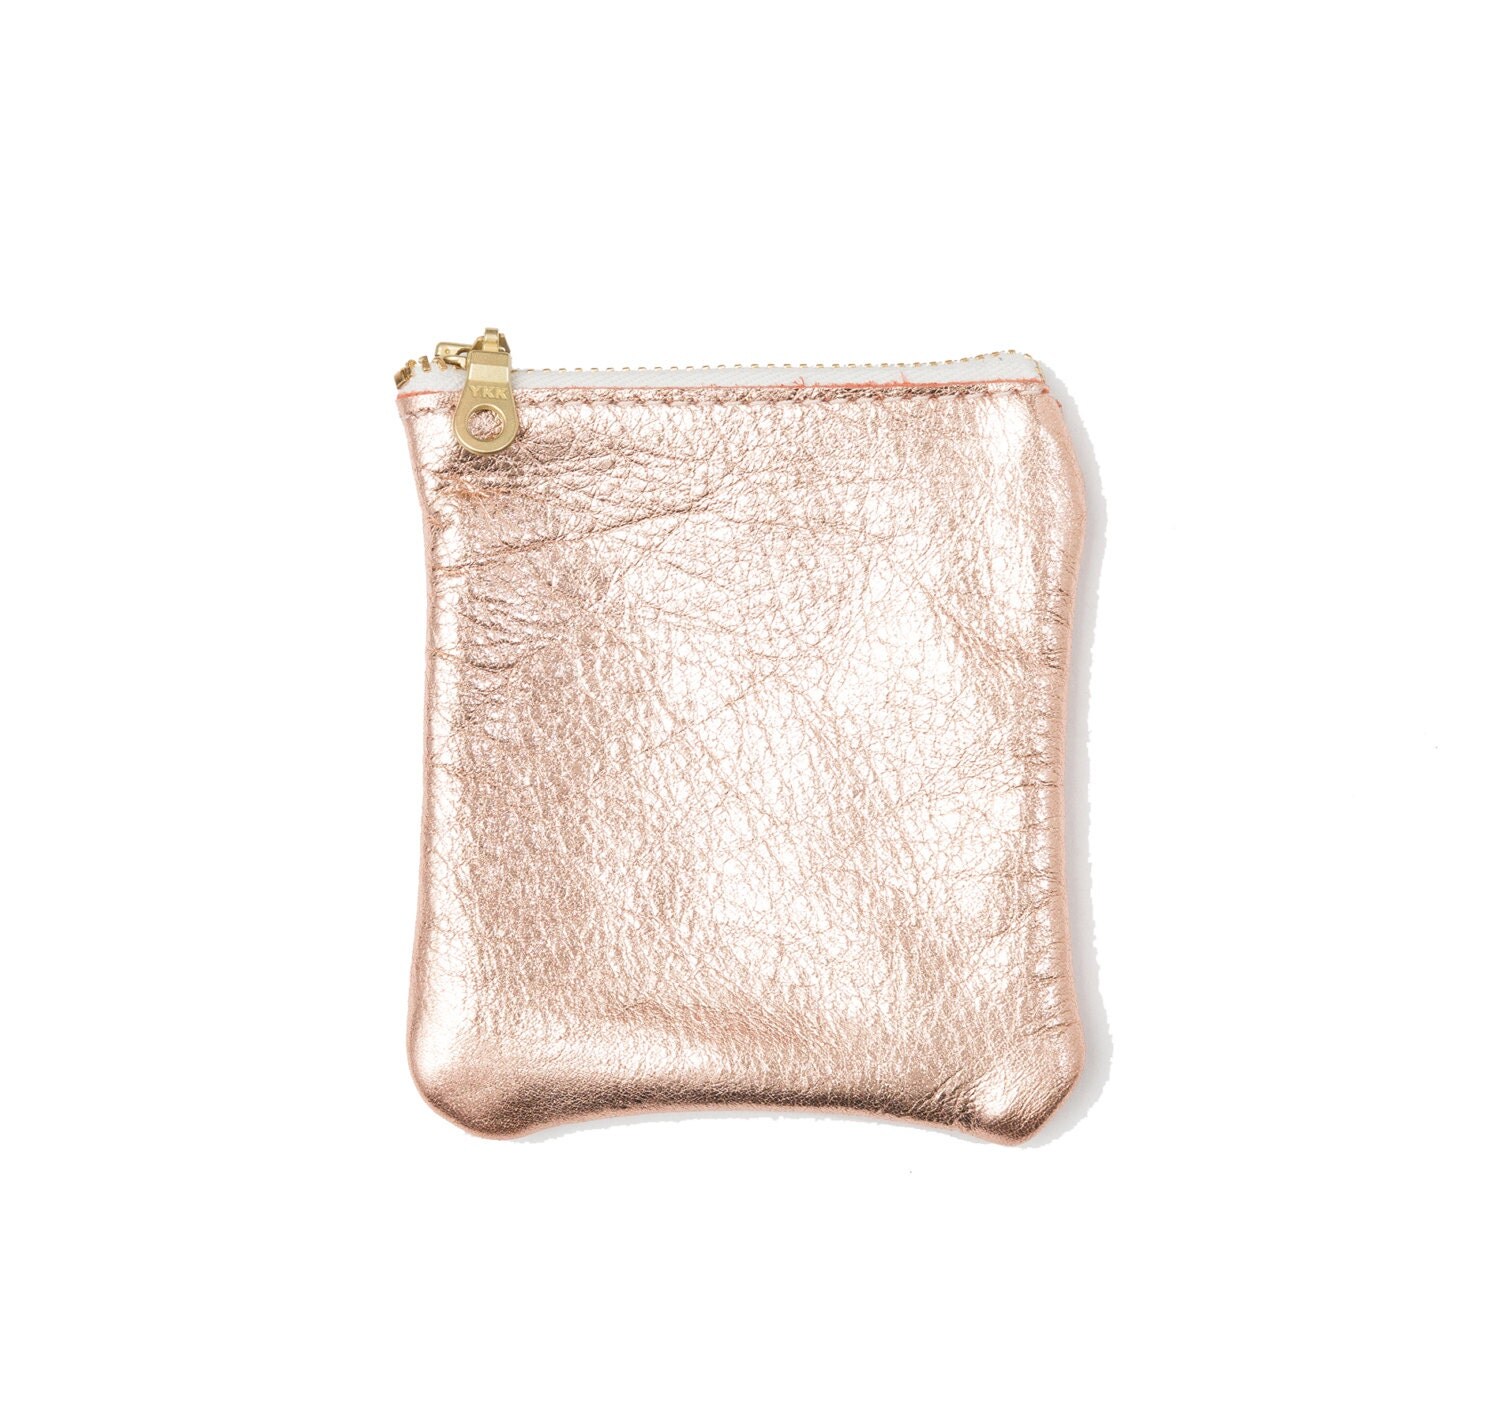 Cherry Ave Large Rose Gold Leather Coin Purse Copper Coin